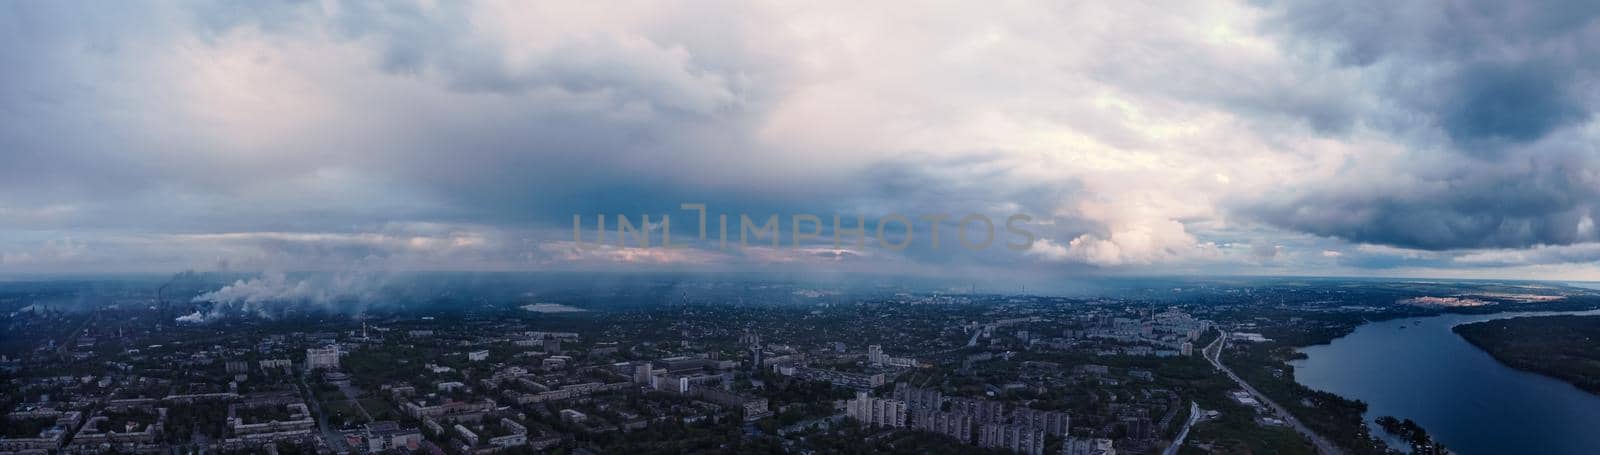 panoramic view of the city with river . Smog from industrial zone over city. by igor010